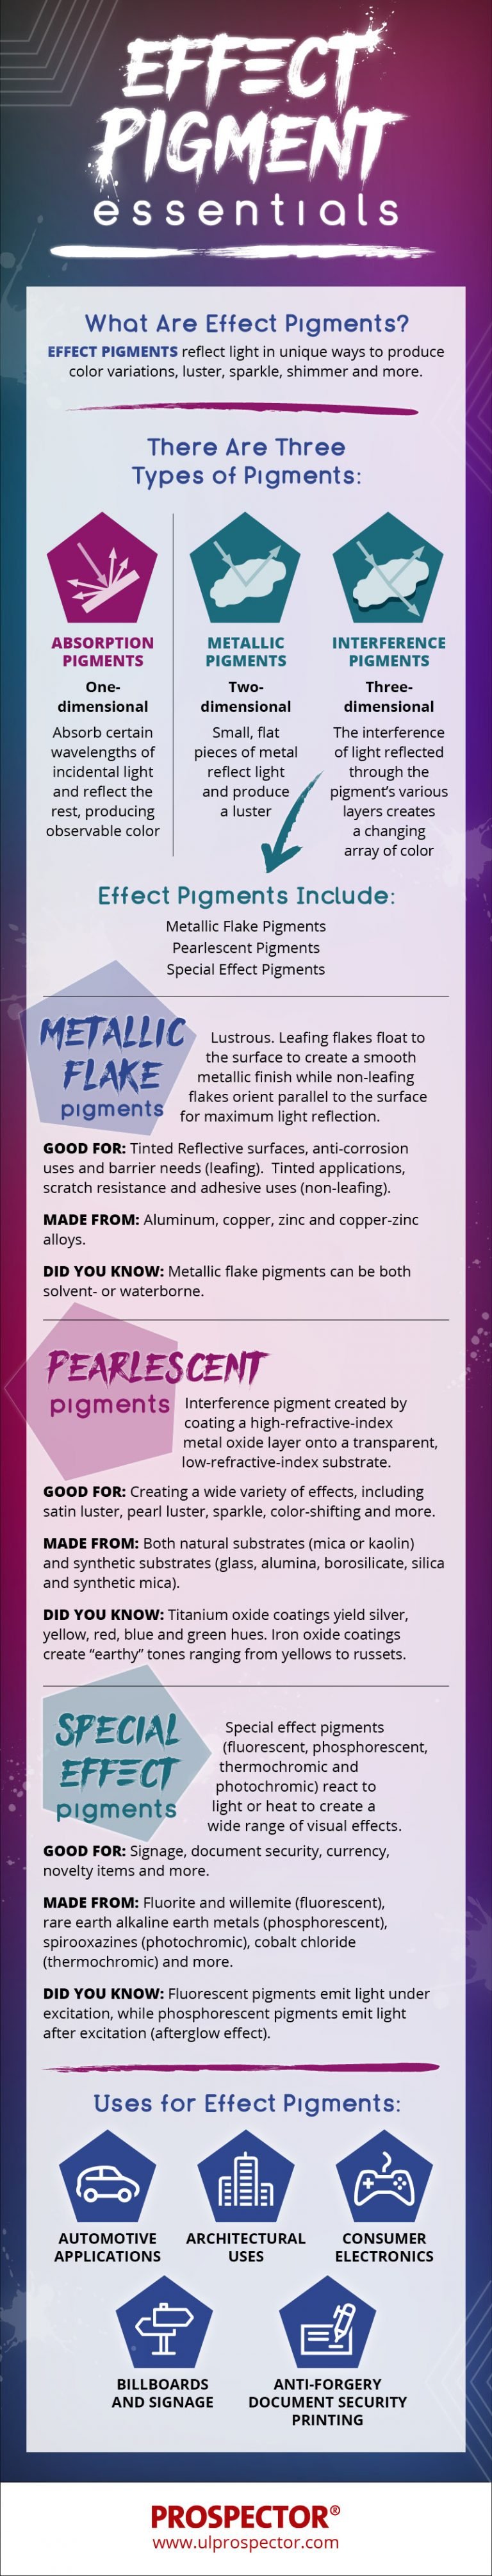 Essentials of effect pigments for paints and coatings [Infographic]